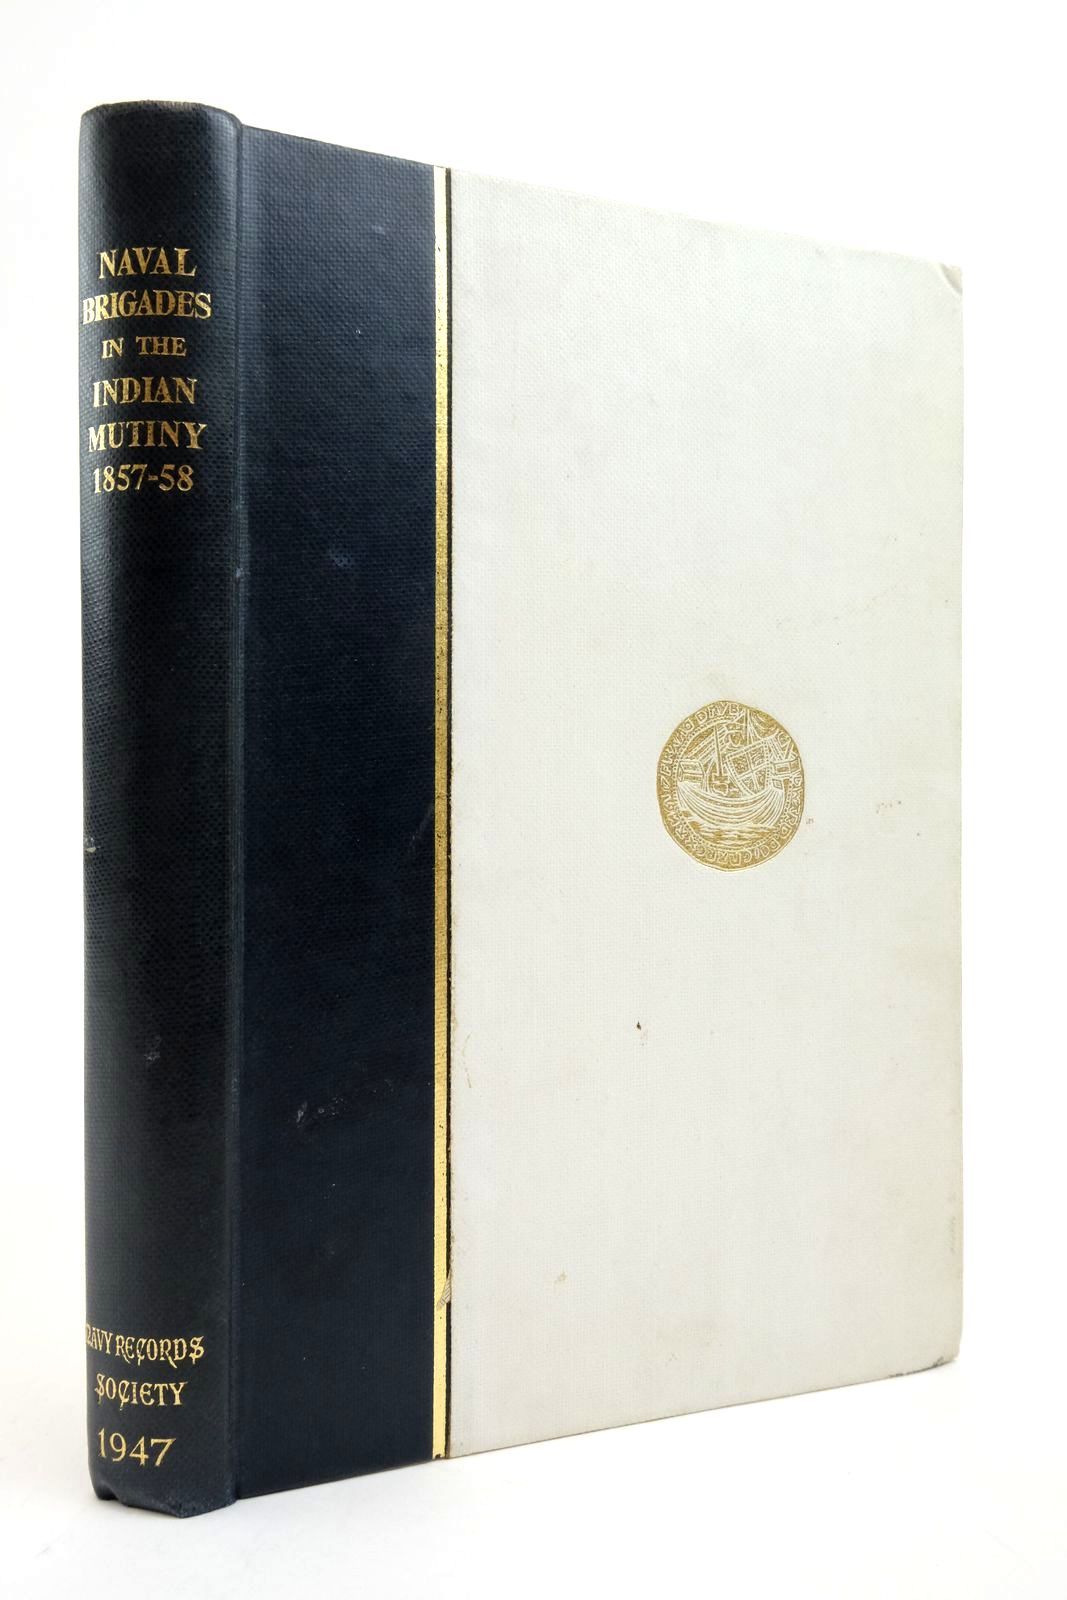 Photo of THE NAVAL BRIGADES IN THE INDIAN MUTINY 1857-58 written by Rowbotham, W.B. published by The Navy Records Society (STOCK CODE: 2138535)  for sale by Stella & Rose's Books